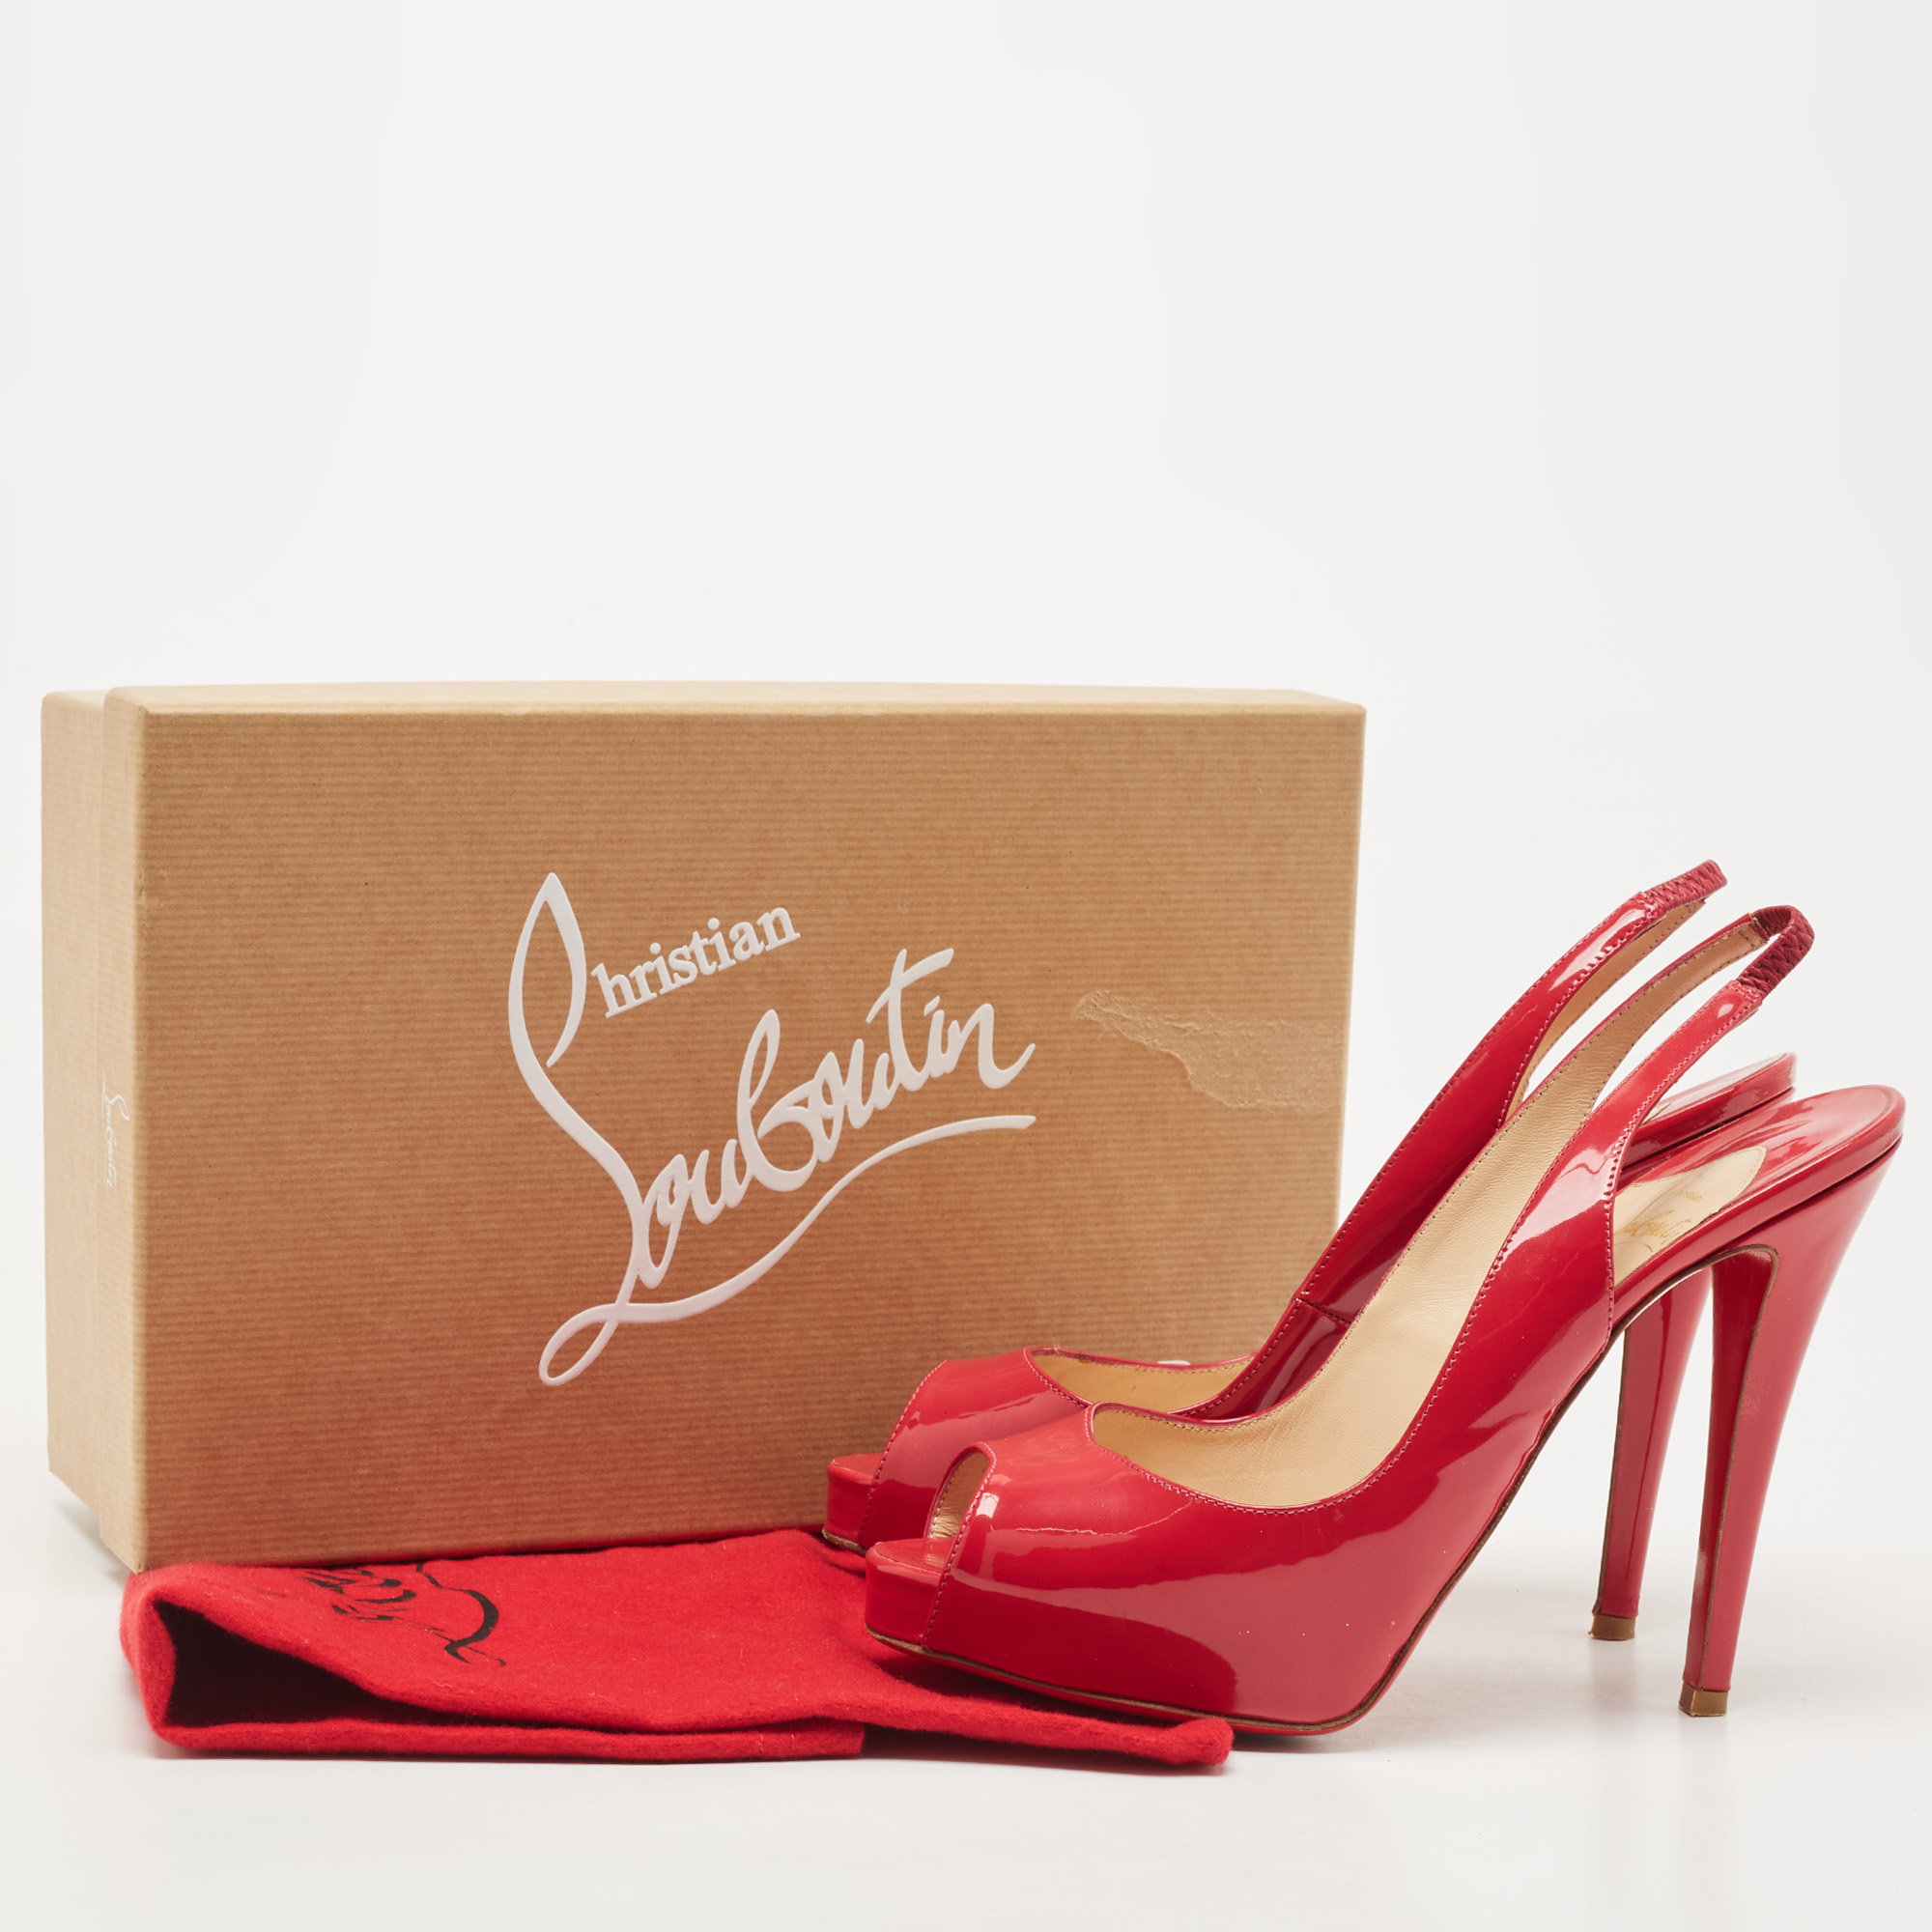 Christian Louboutin Red Patent Leather Private Number Peep Toe Slingback Sandals Size 38.5